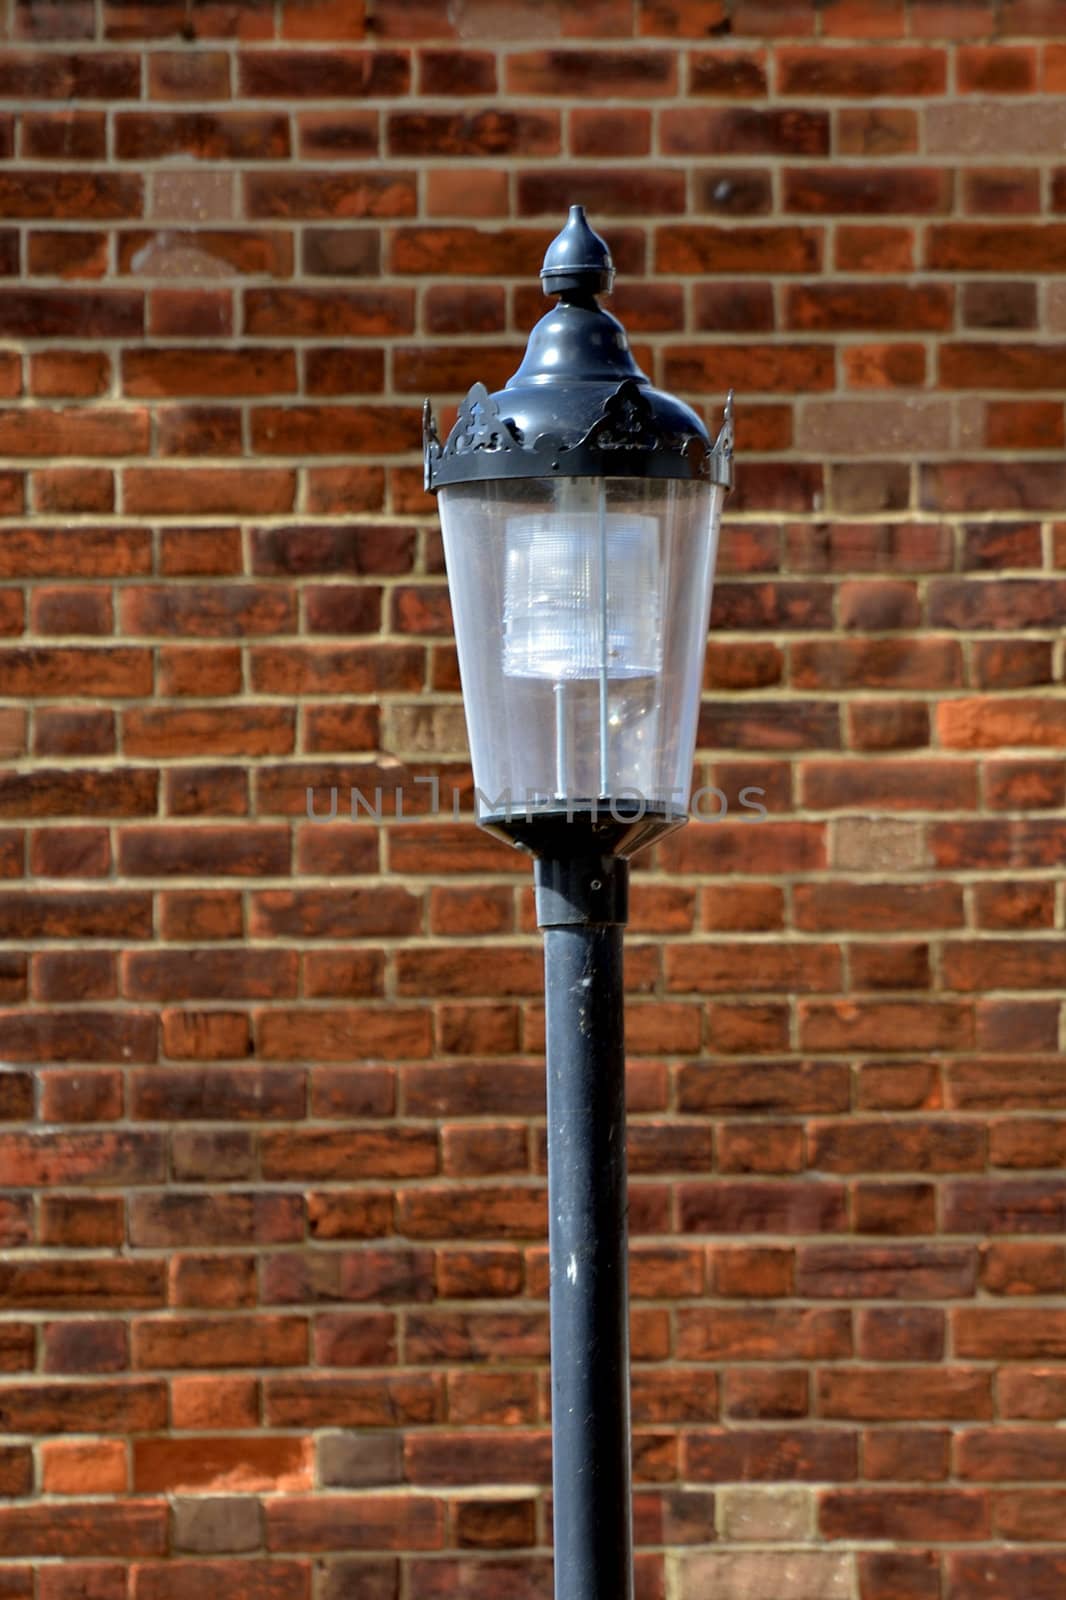 Black Lamp with Brick Background by pauws99